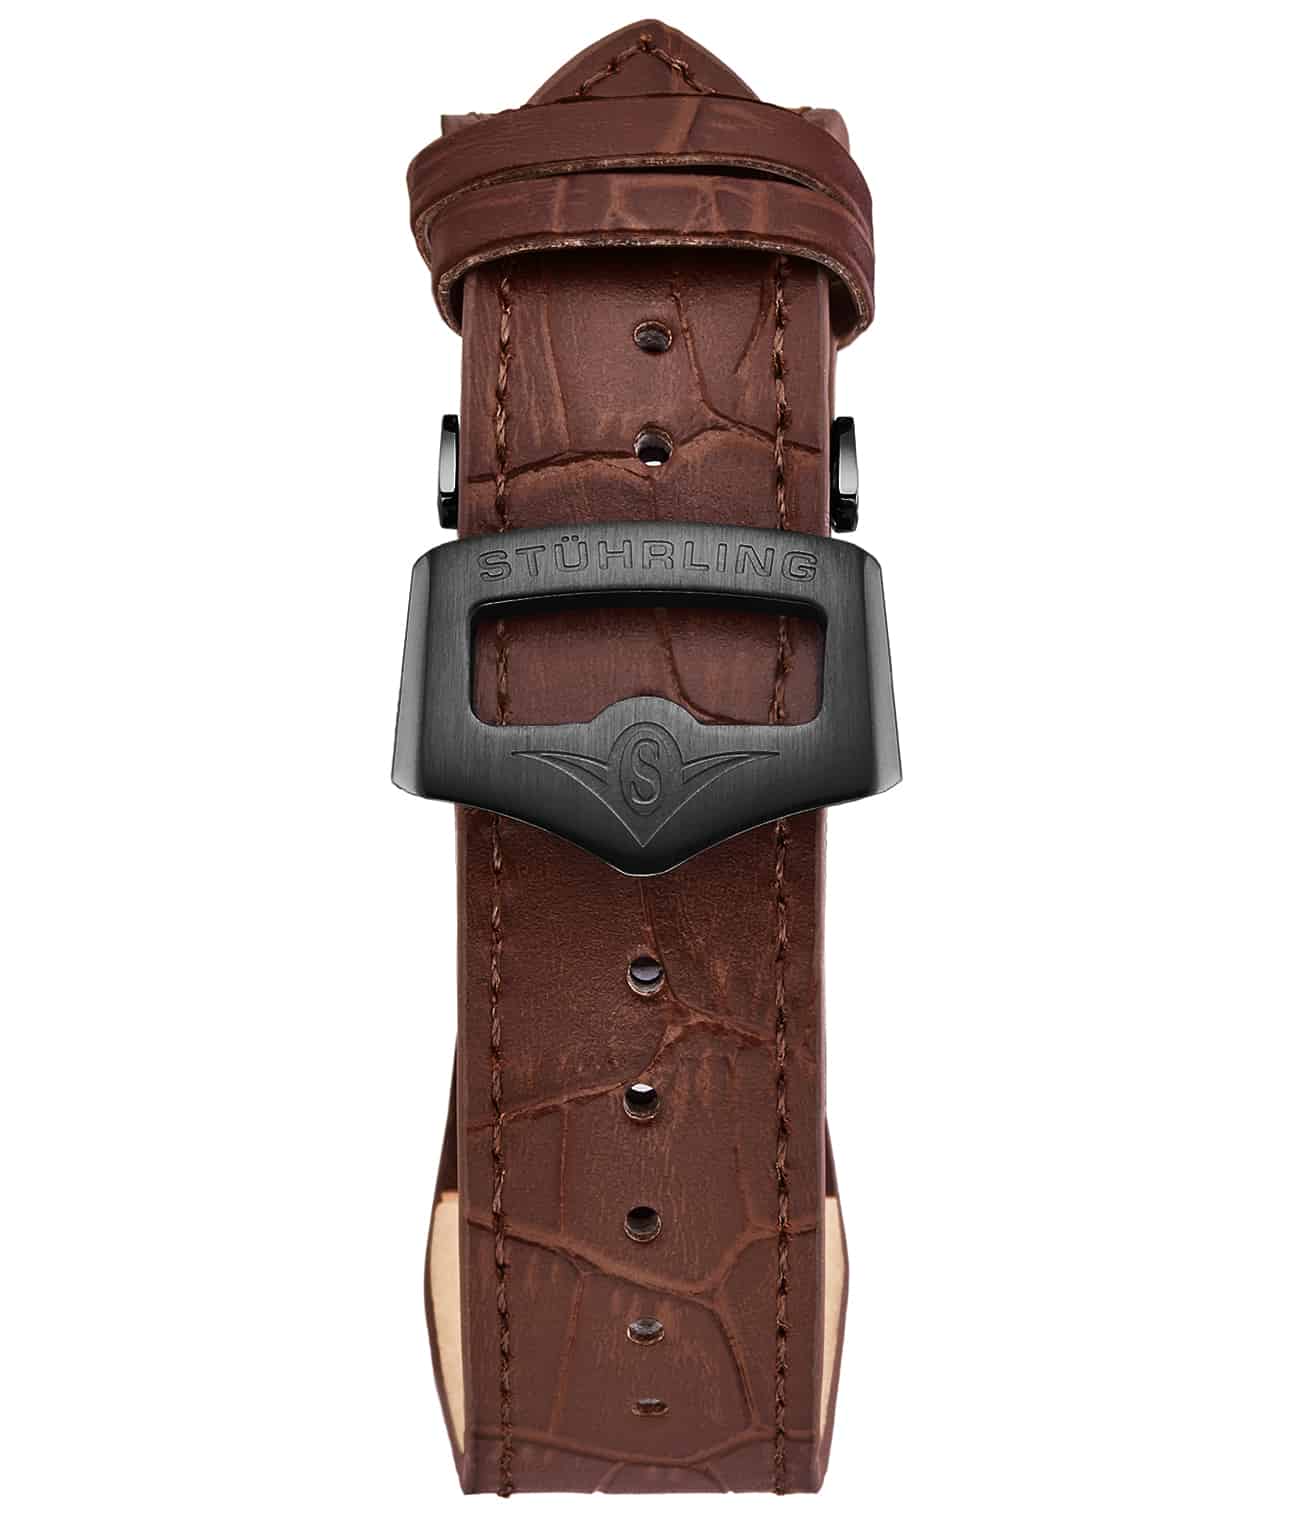 22mm Leather Strap with Stainless Steel Deployant Buckle